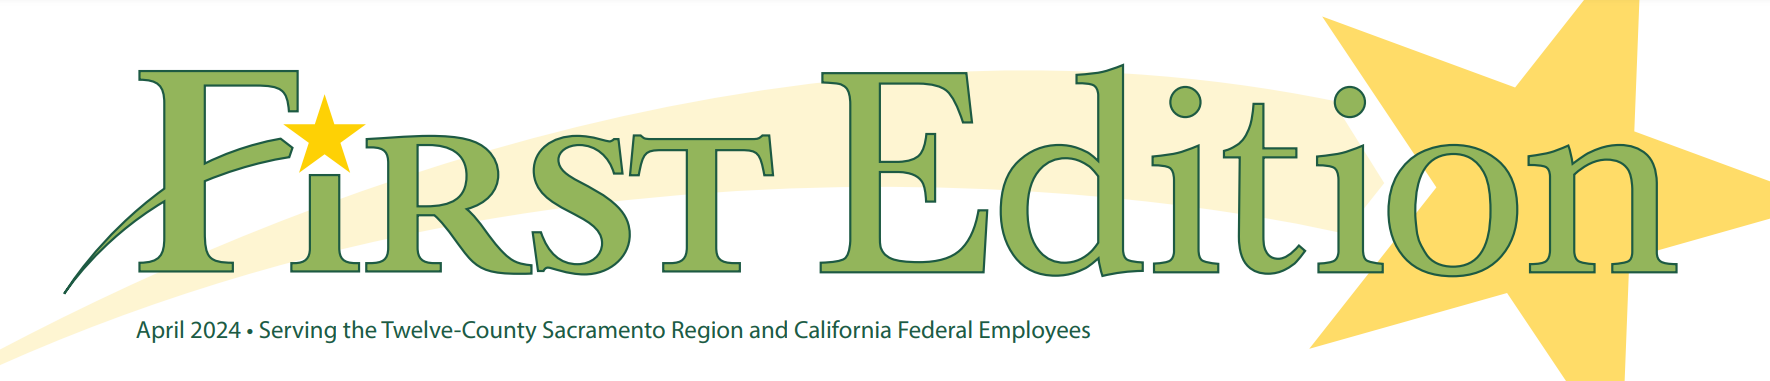 First Edition banner - 
                        April 2024 - Serving the Twelve County Sacramento Region and California Federal Employees